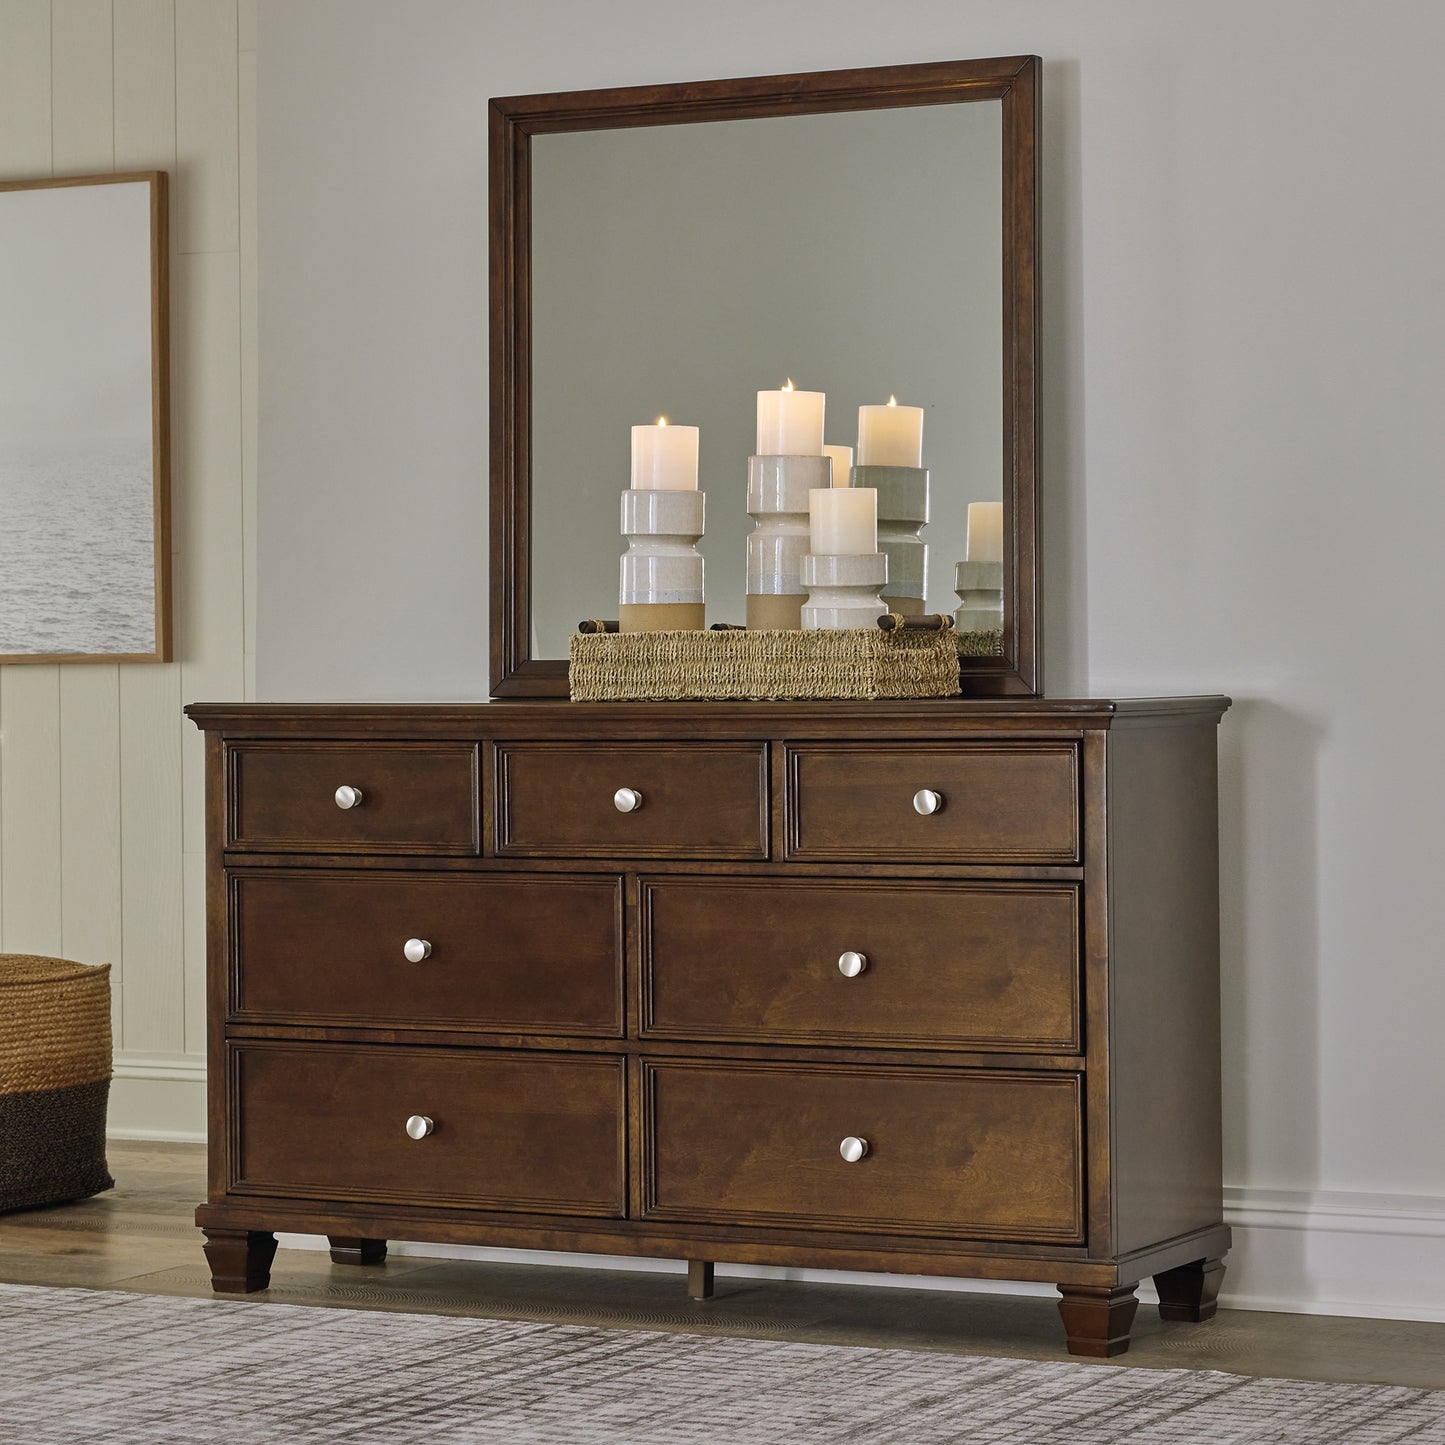 Danabrin King Panel Bed with Mirrored Dresser and Chest